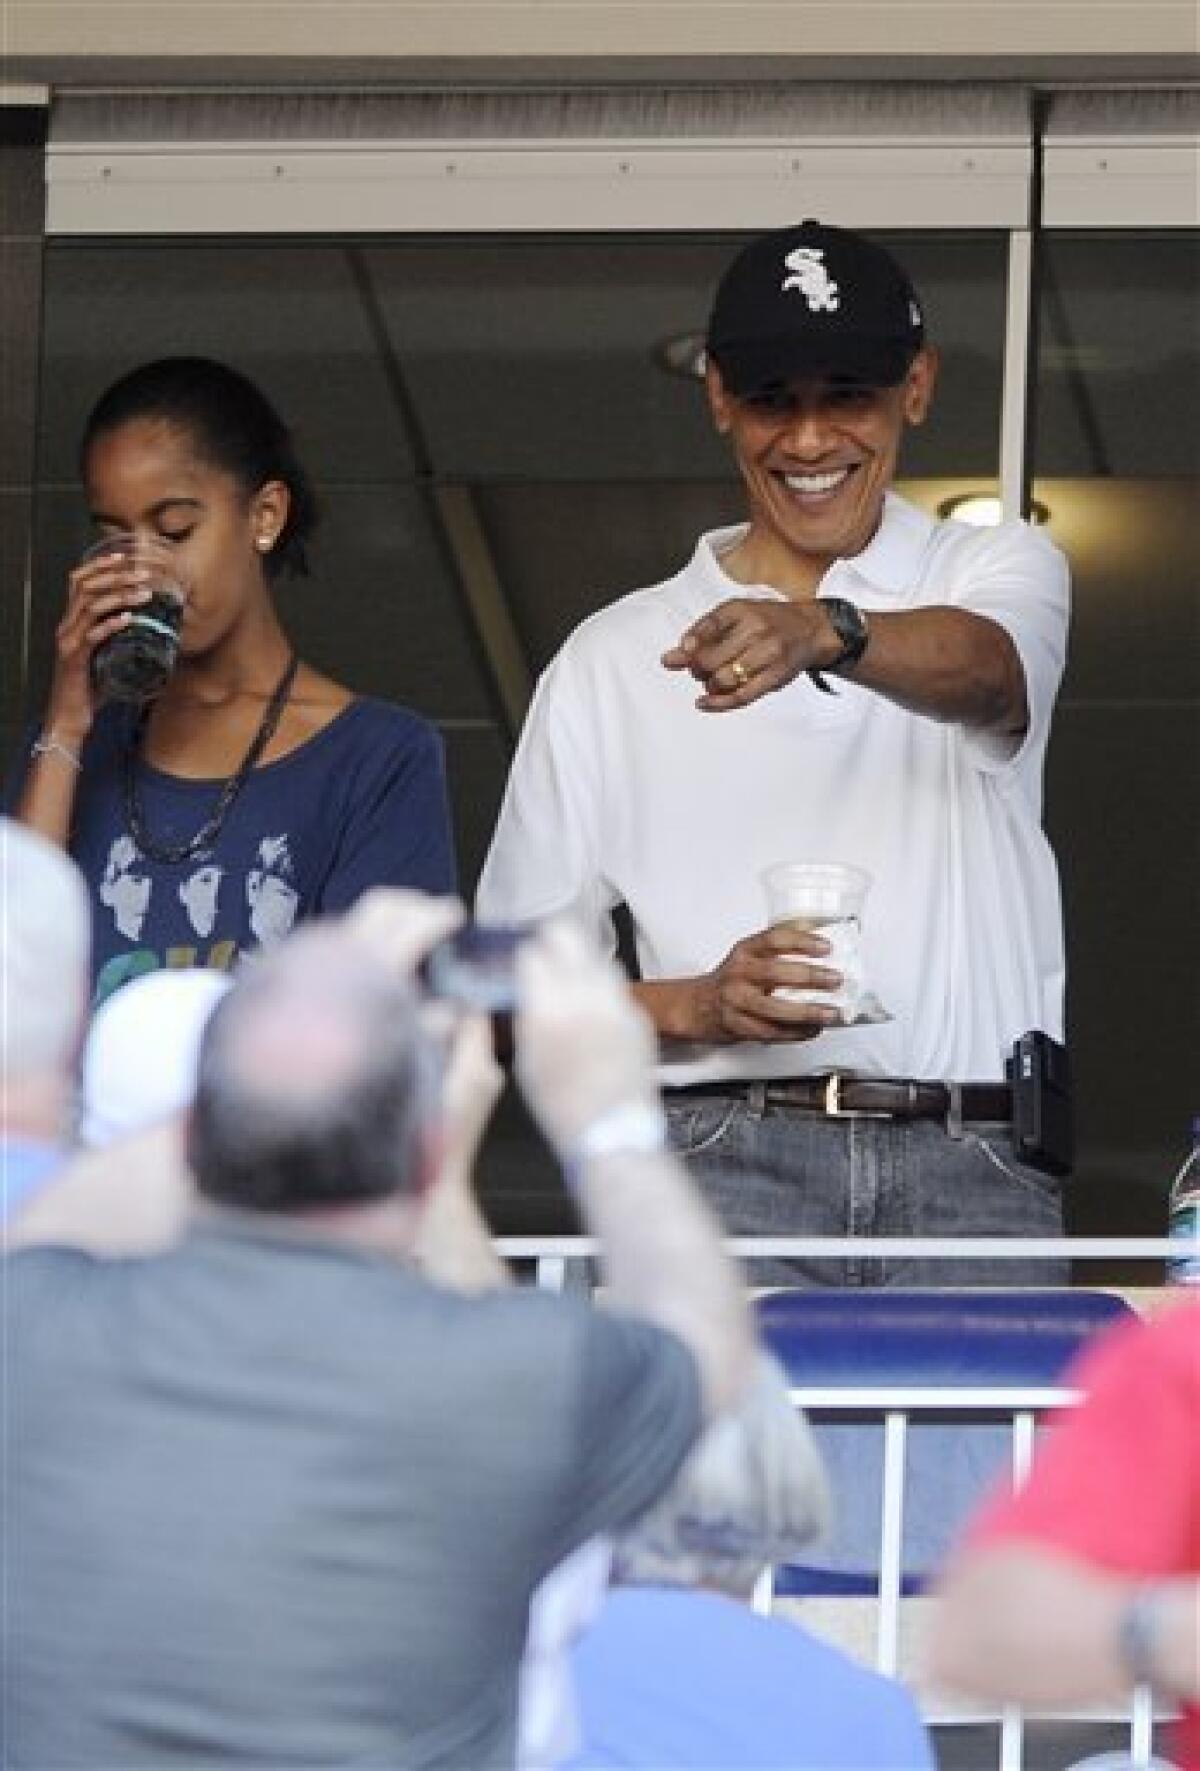 President Barack Obama, wearing a White Sox baseball cap, points to the crowd as he attends a baseball game between the Washington Nationals and the Chicago White Sox, Friday, June 18, 2010, in Washington. (AP Photo/Nick Wass)